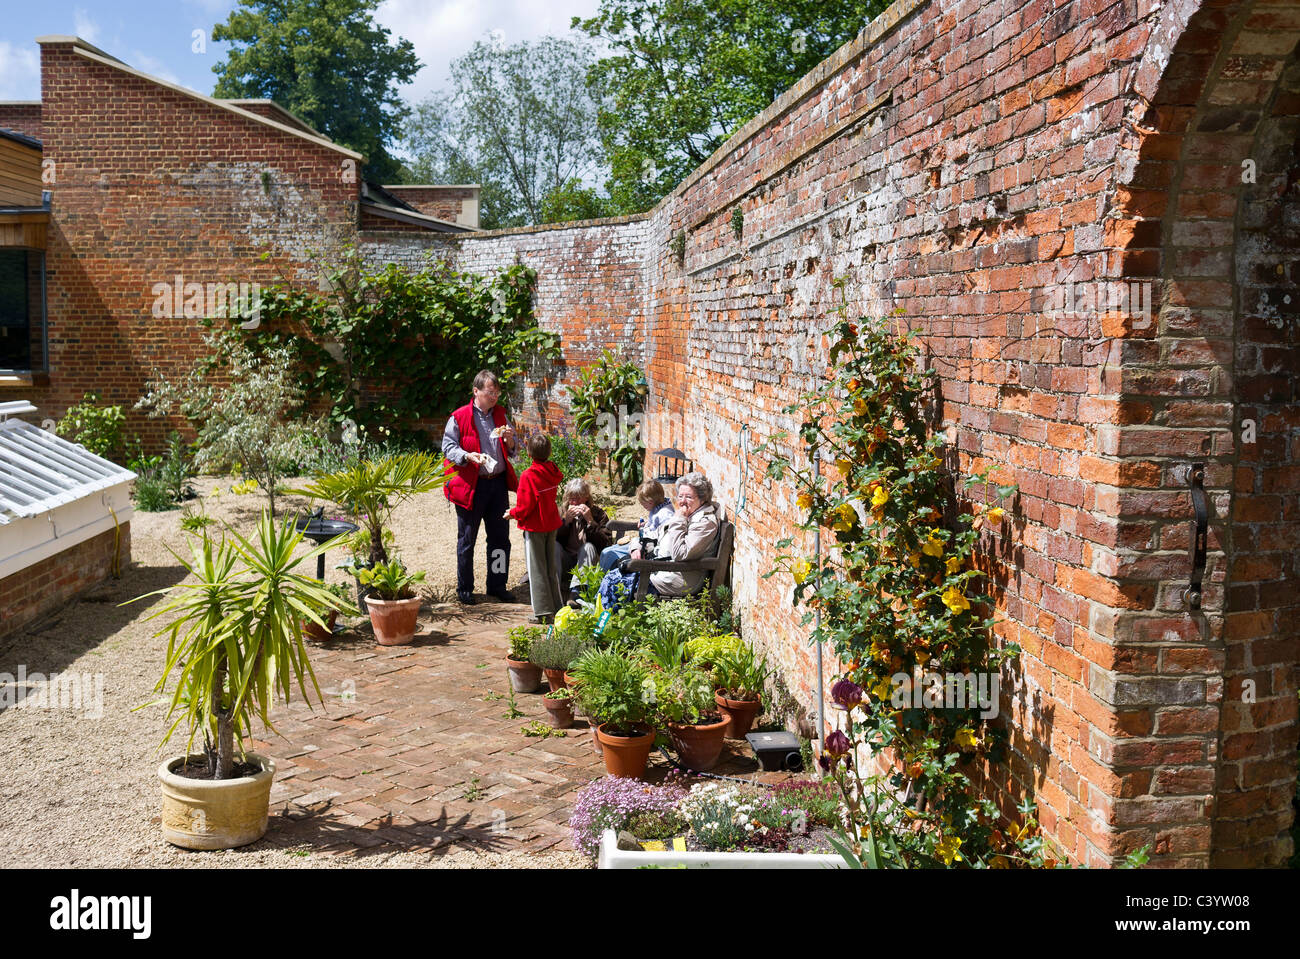 Visitors in the old walled garden at Rowdeford House Wiltshire UK for charitable event Stock Photo